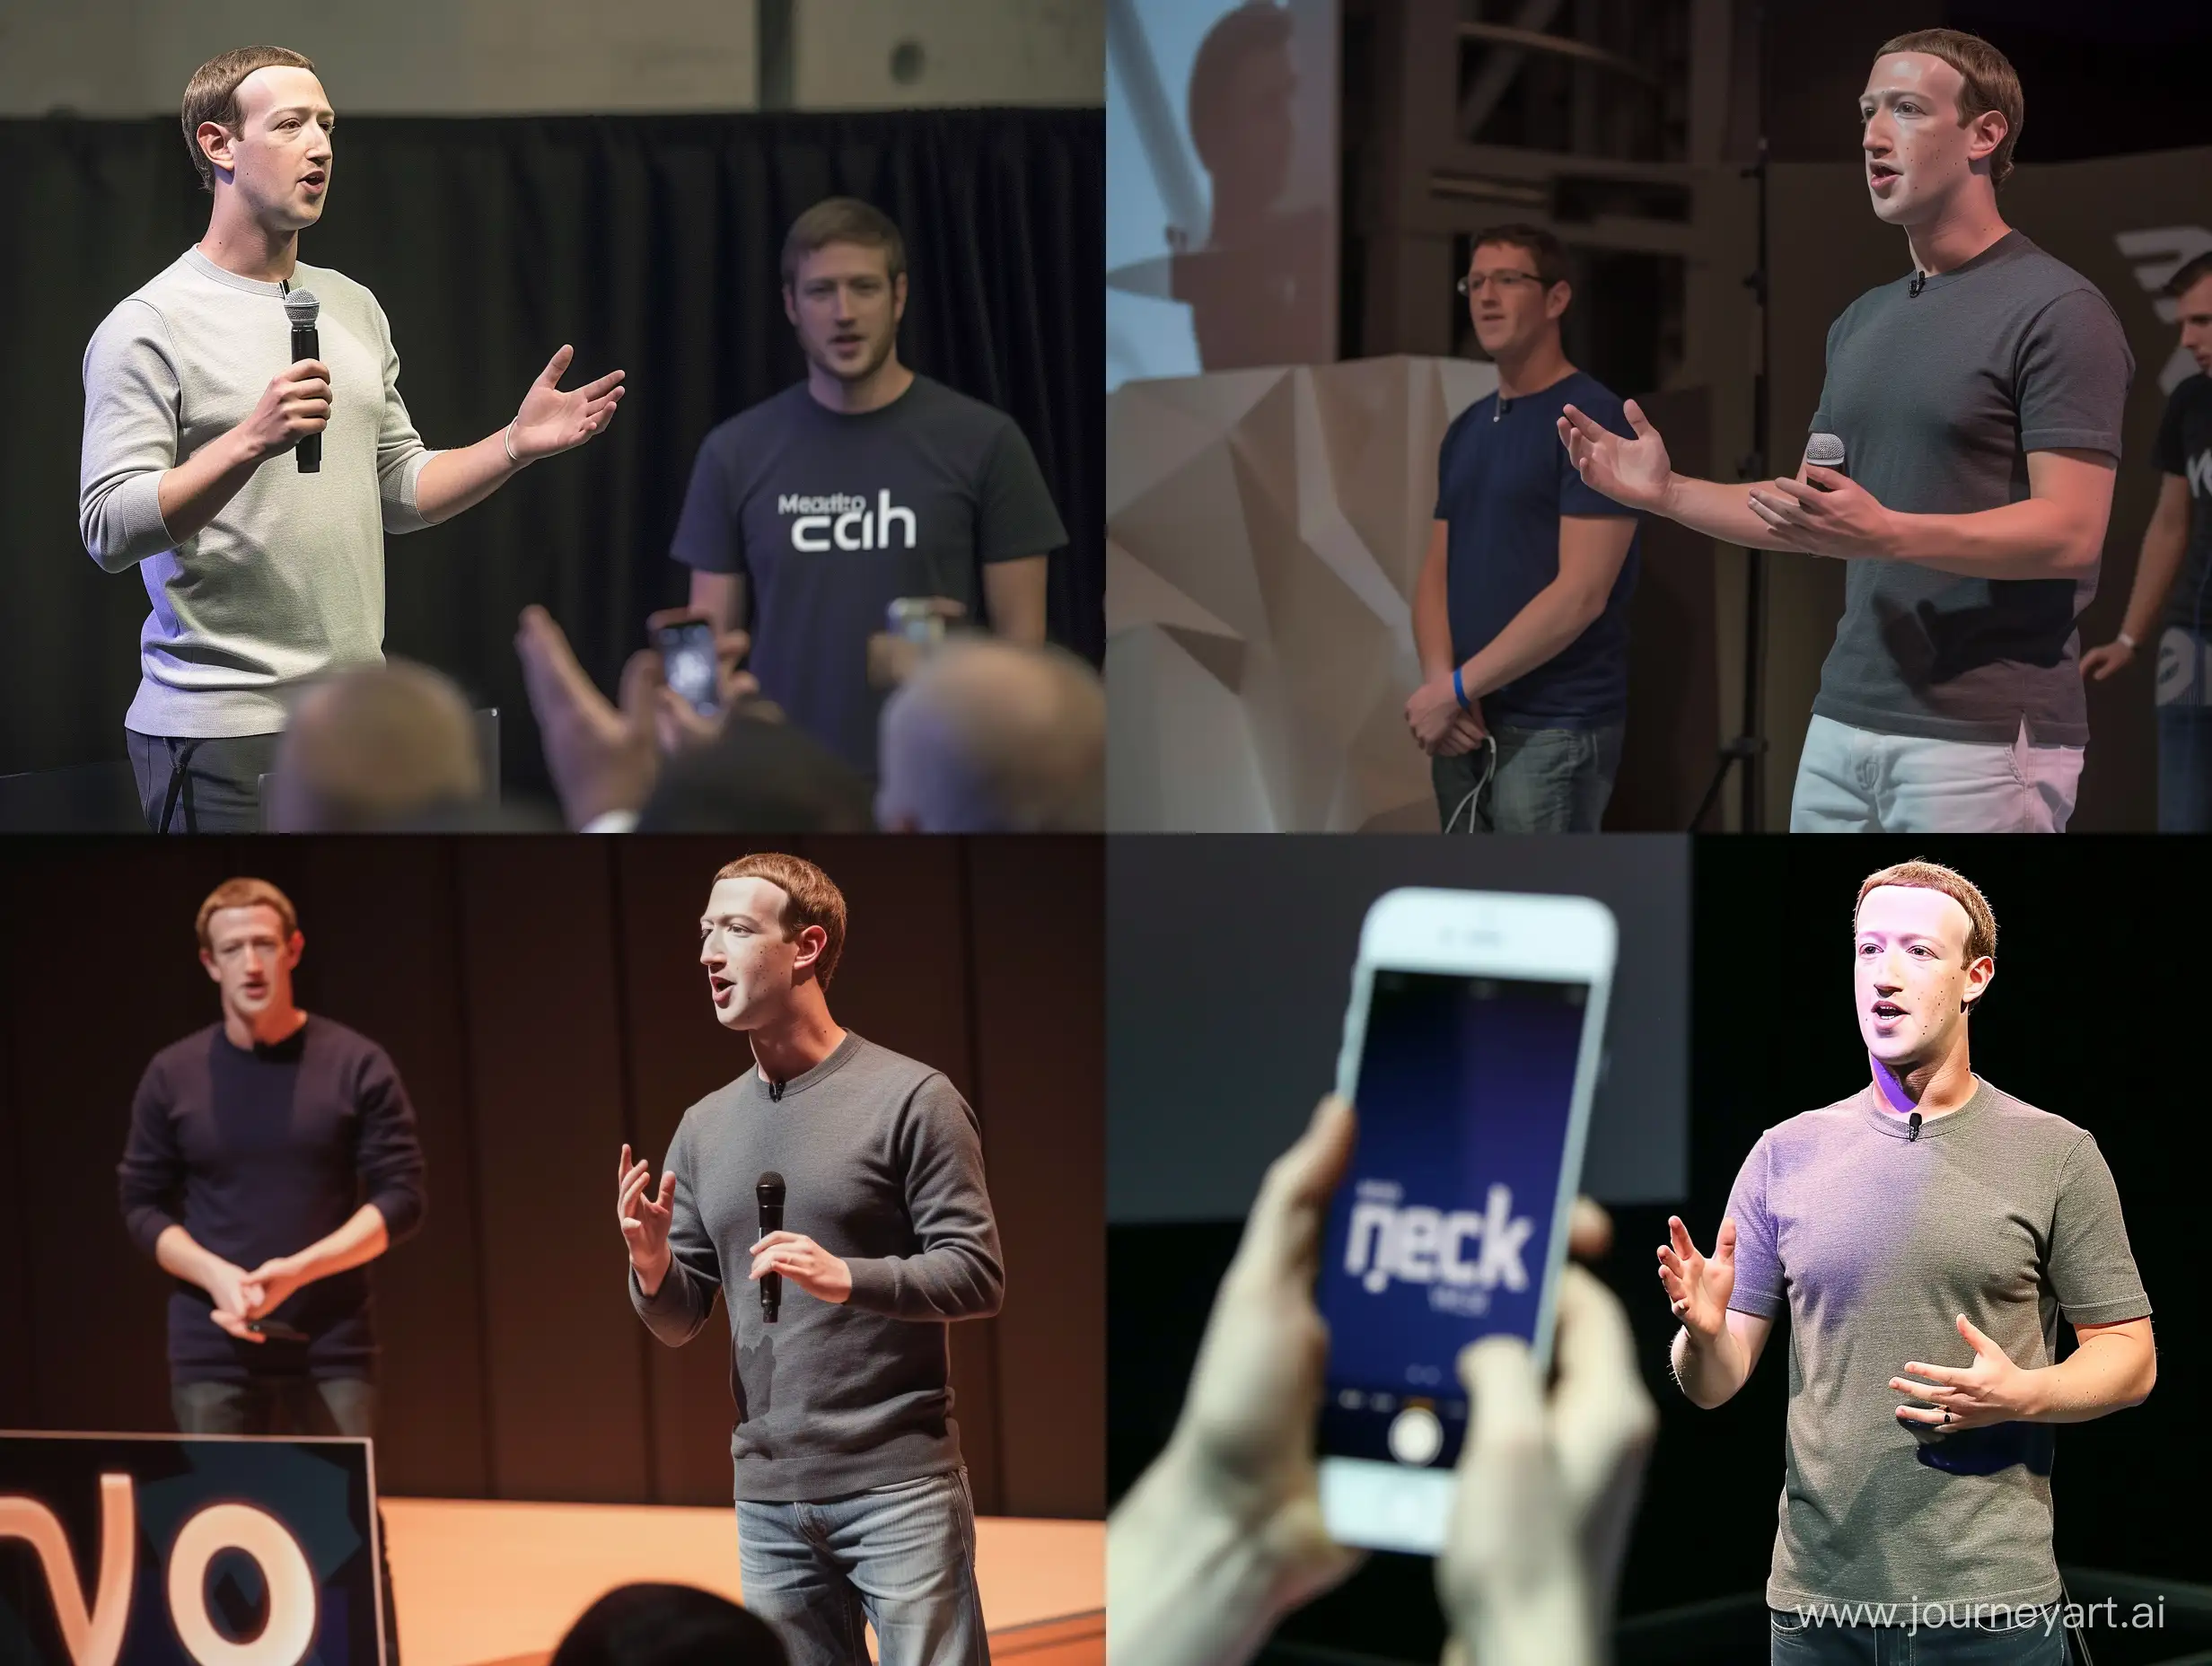 The image shows Mark Zuckerberg giving a speech at an event about Meta, captured on an iPhone. The photo provides a detailed view of both individuals and their surroundings. Color correction has been applied to enhance the visual quality of the image.